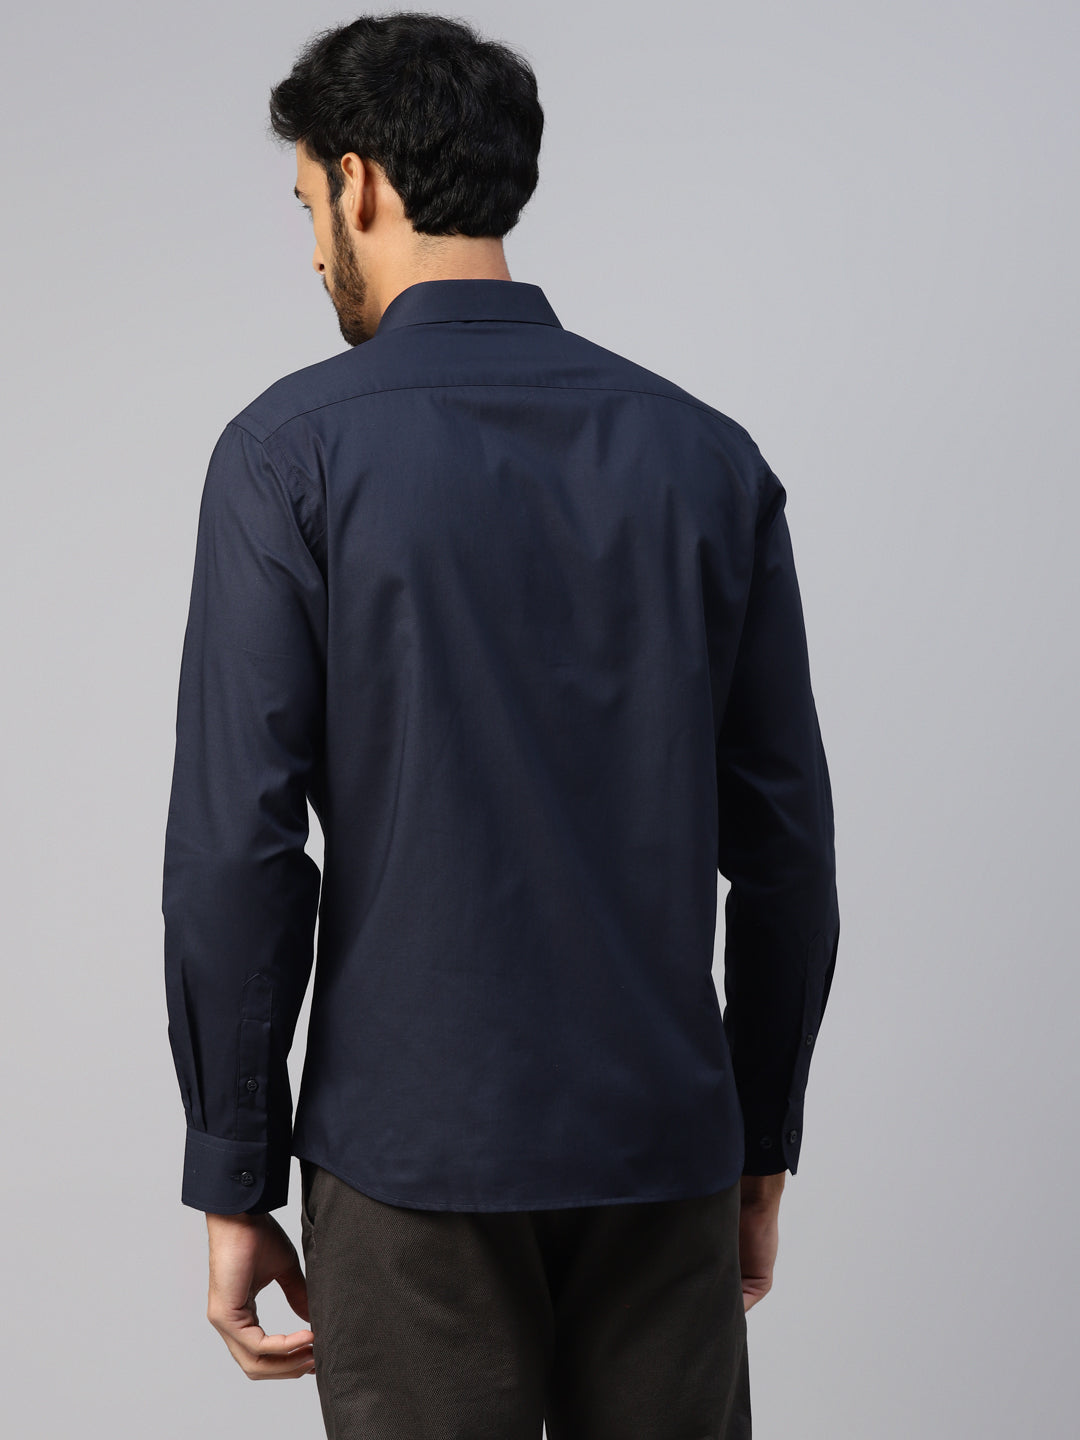 Don Vino Navy Blue Slim Fit Shirt With Contrast Pockets for Men